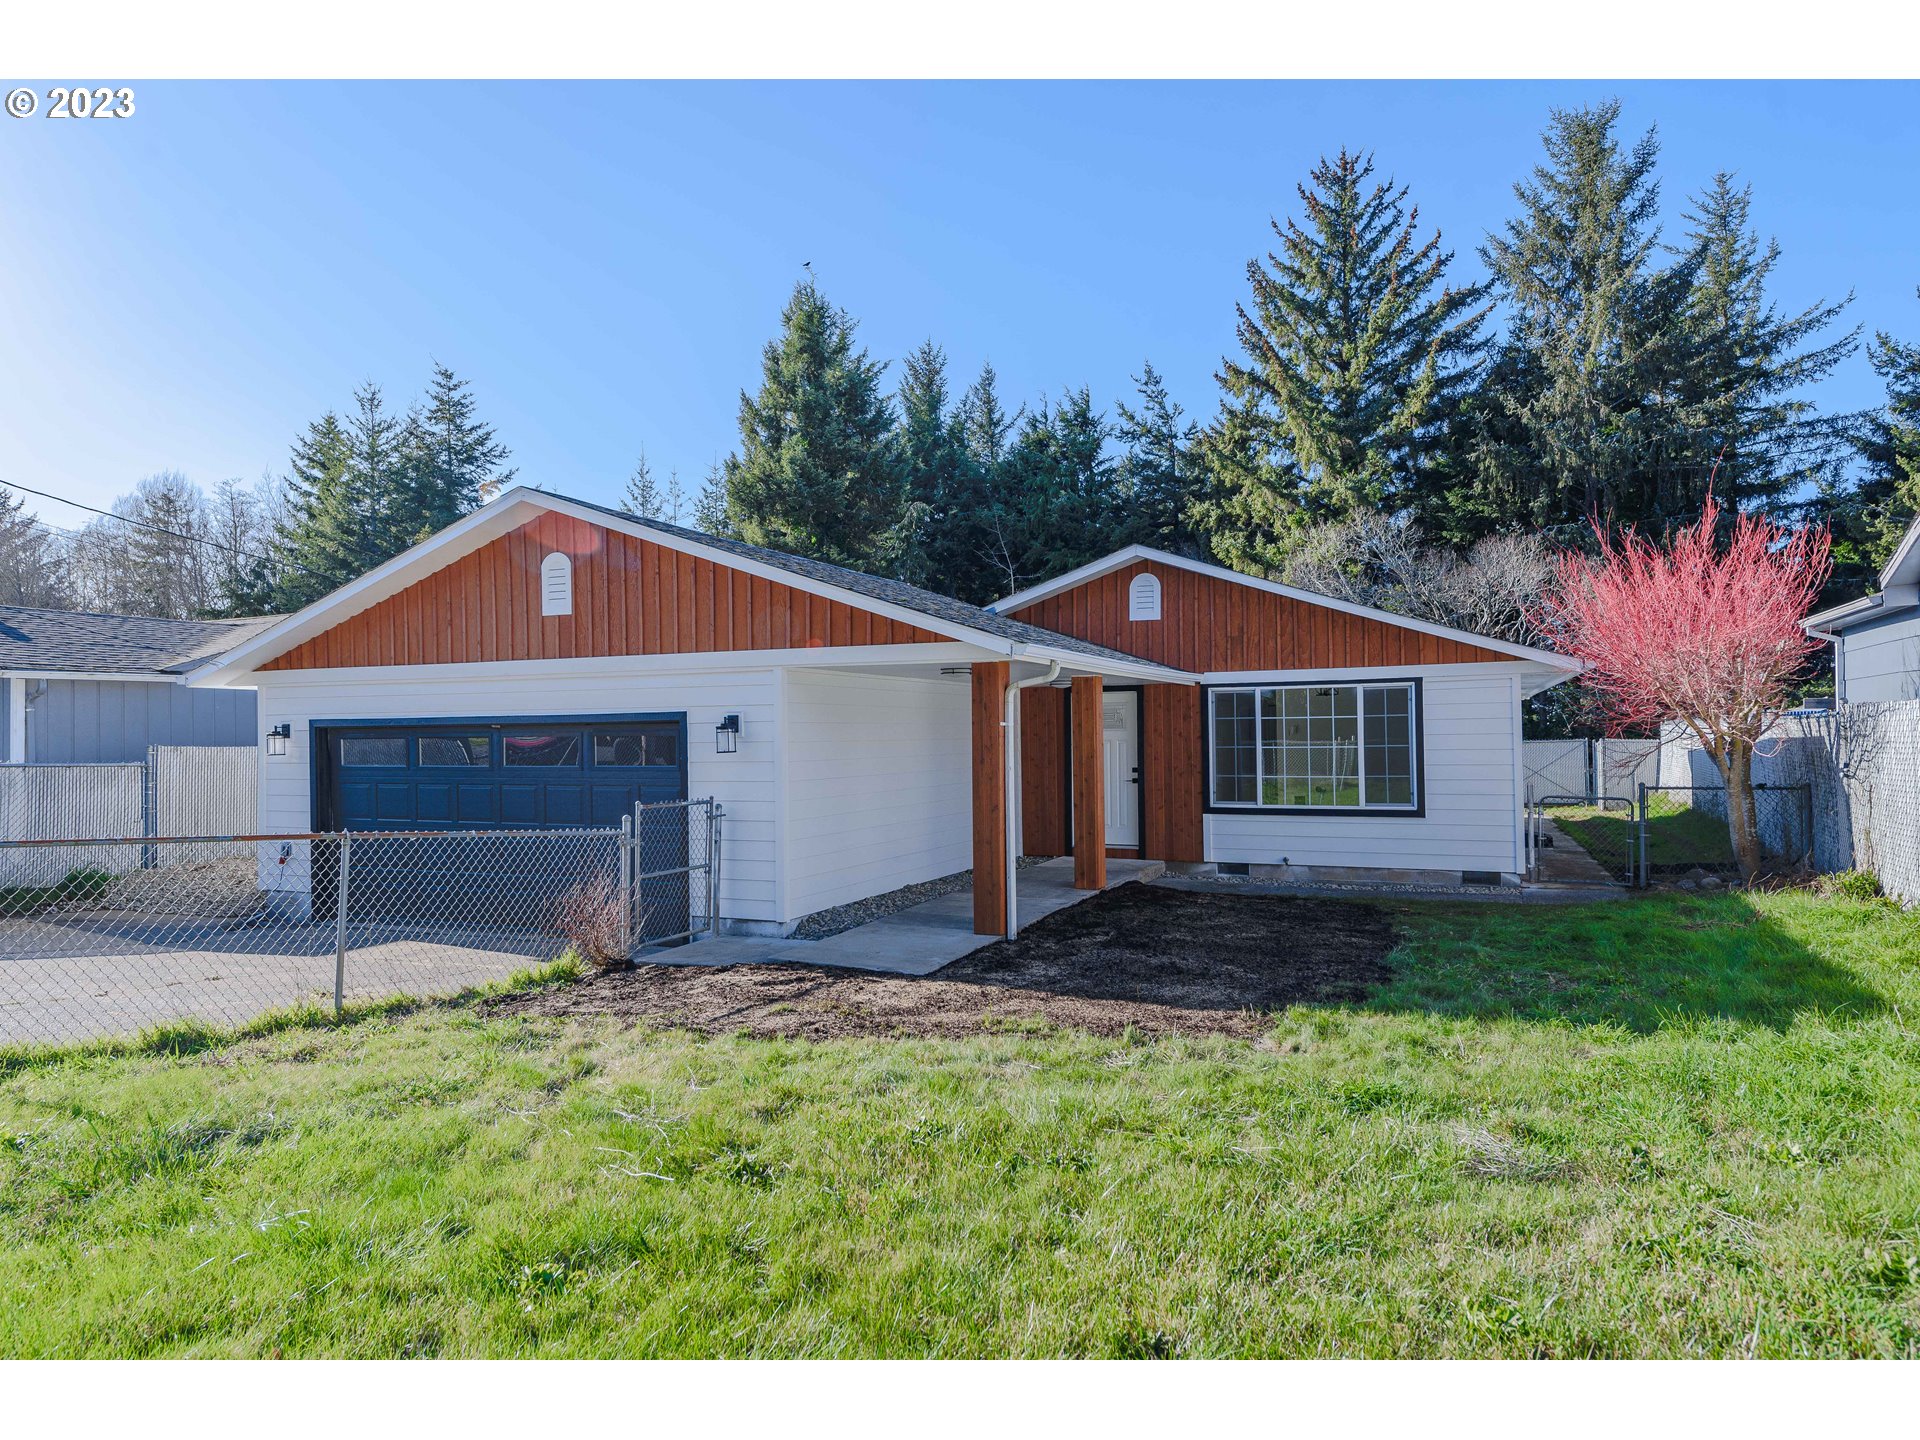 710 S WASSON ST, Coos Bay, OR 97420